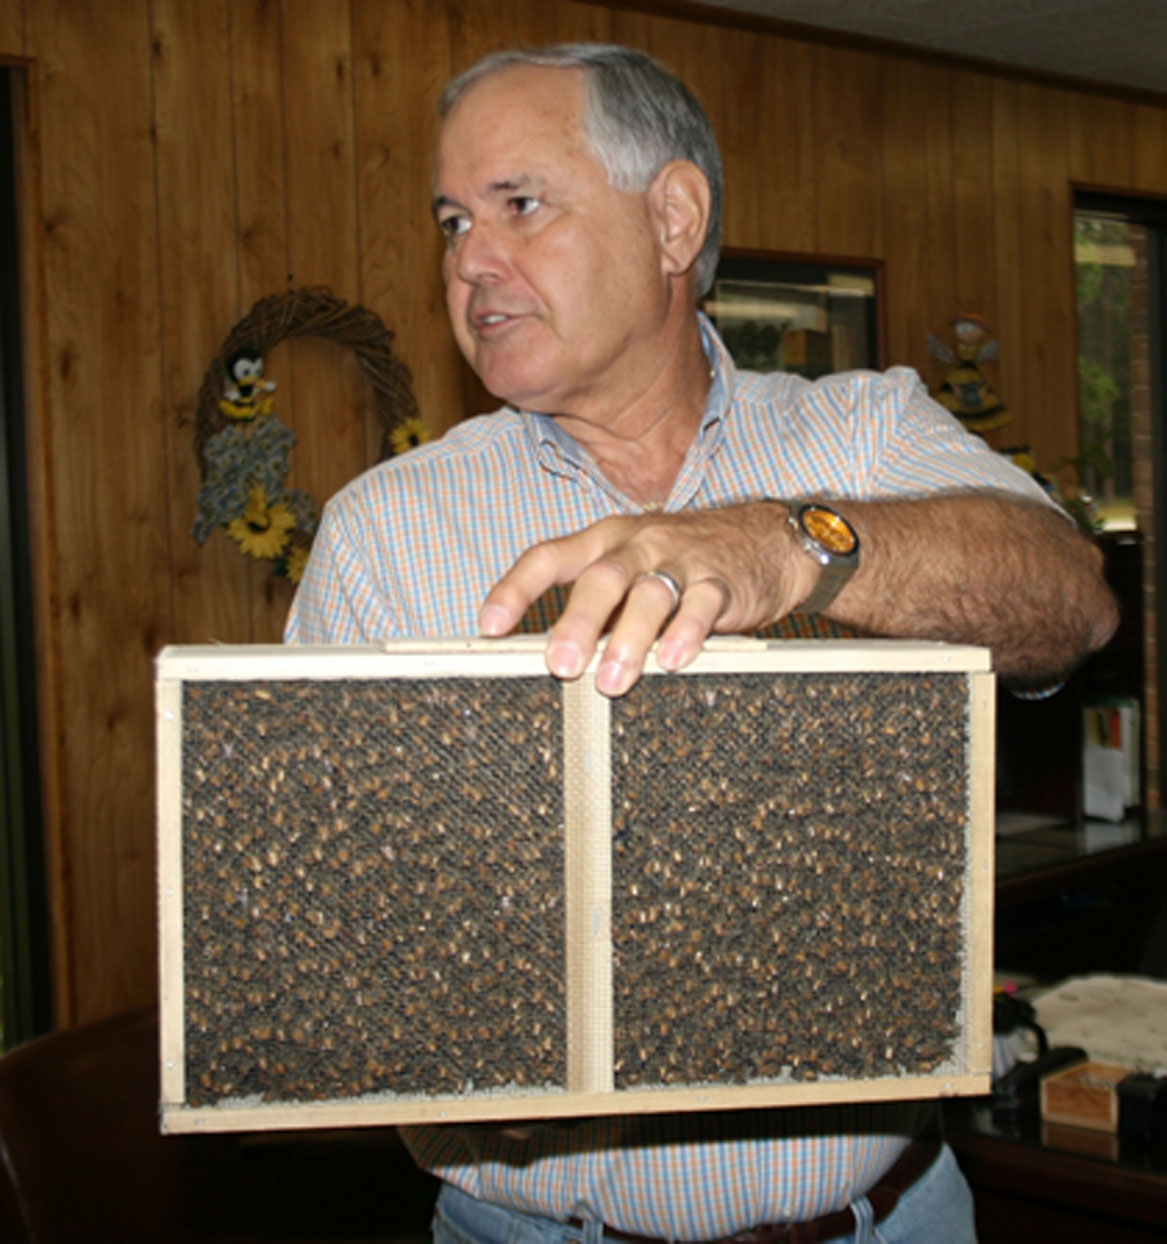 Reg Wilbanks, owner of Wilbanks Apiaries Bees in Claxton, Ga., holds a box of bees as he talks to a group of pre-conference farm tour attendees on Tuesday.